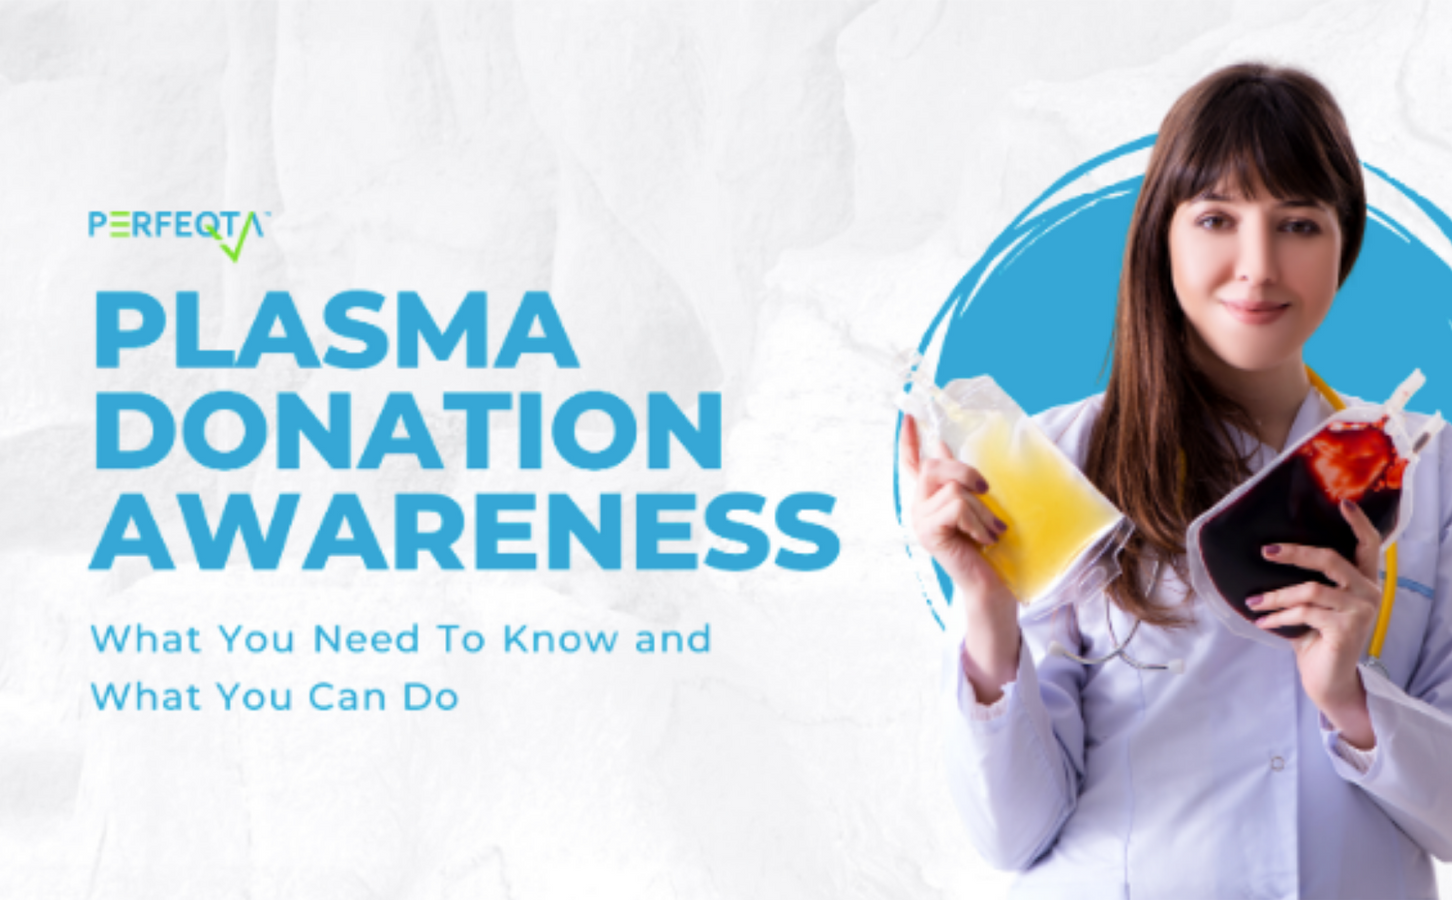 Plasma Donation Awareness- What You Need To Know and What You Can Do